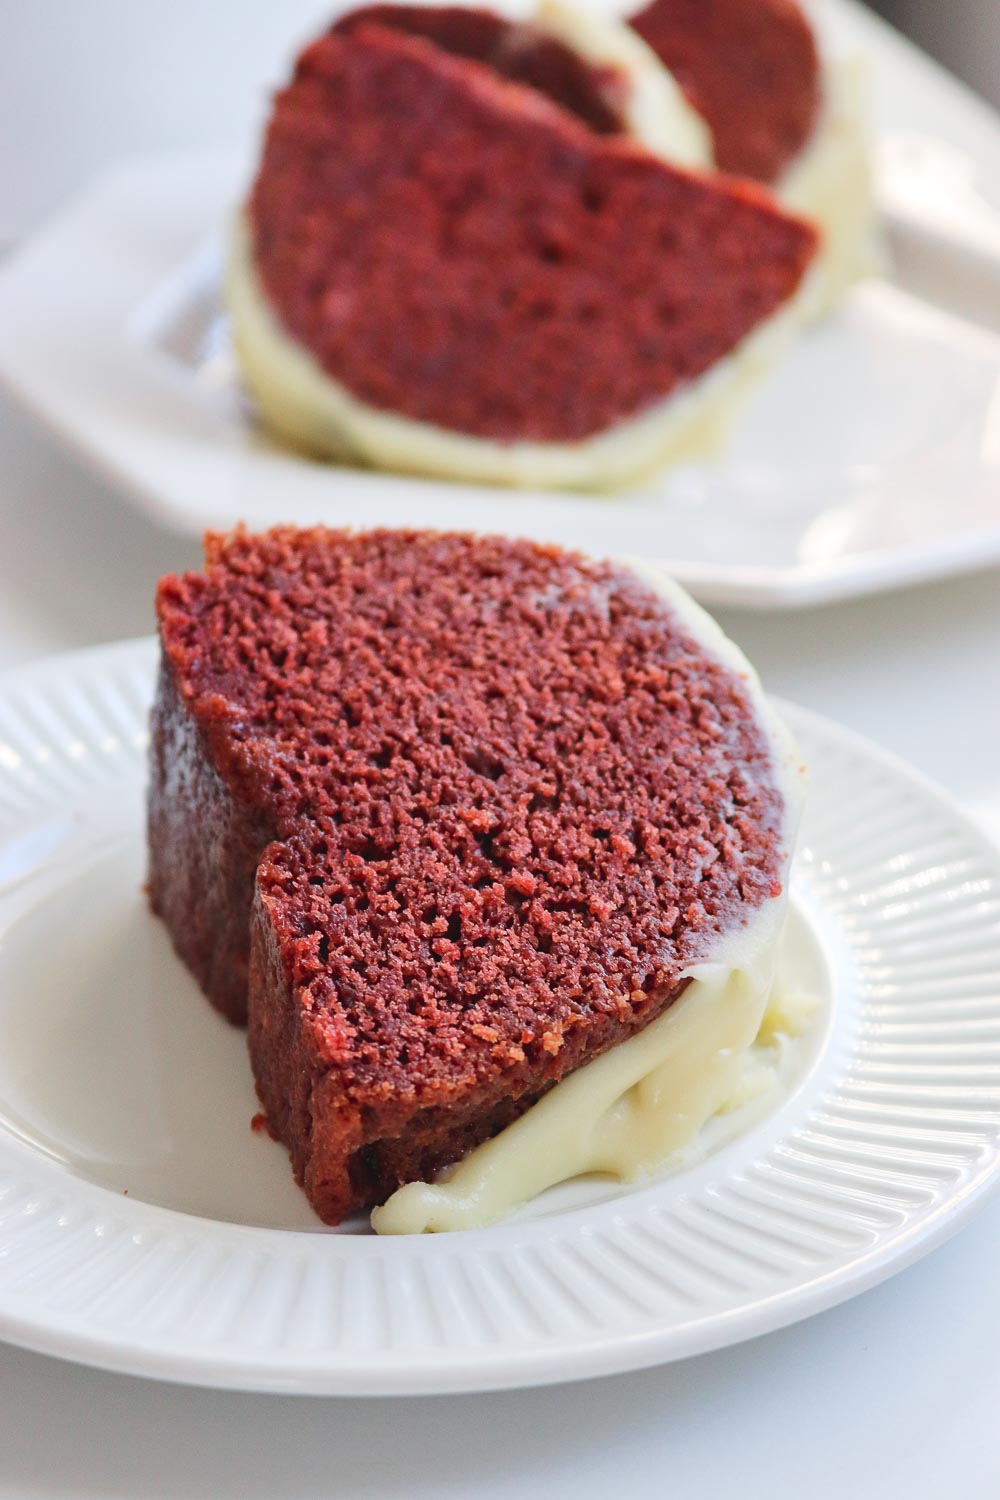 A Nothing Bundt Cake copycat that hits the mark: ultra moist red velvet bundt cake topped with deliciously fluffy cream cheese frosting. This red velvet bundt cake is the easiest from scratch bundt cake you'll ever make! Discover all my secrets to keeping the cake moist and fluffy!